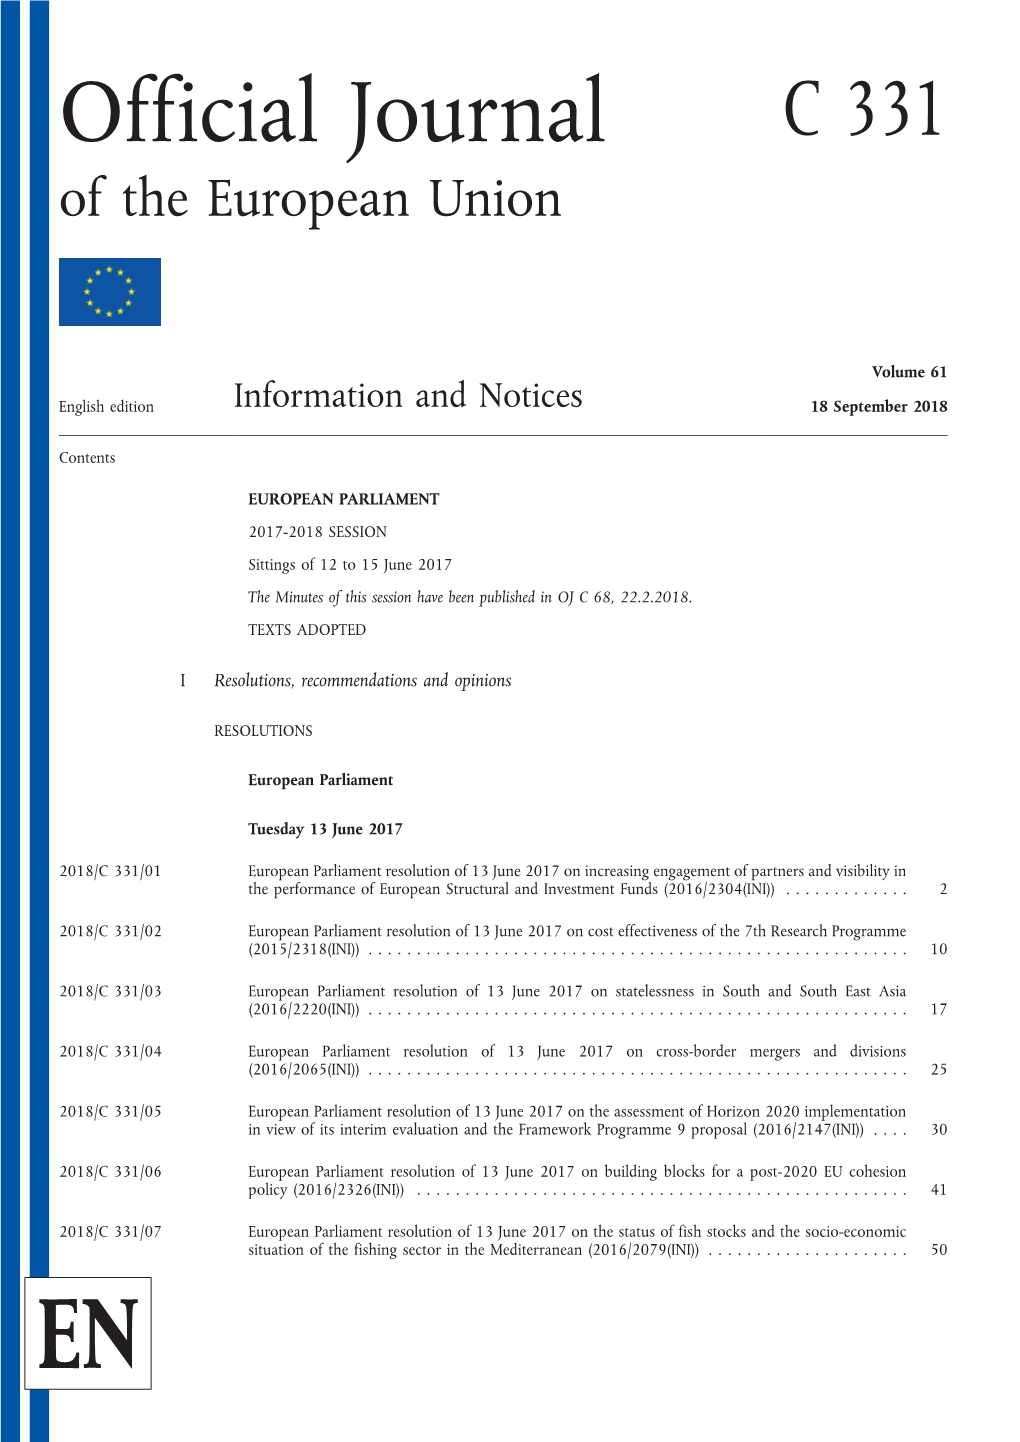 Official Journal of the European Union C 331/1